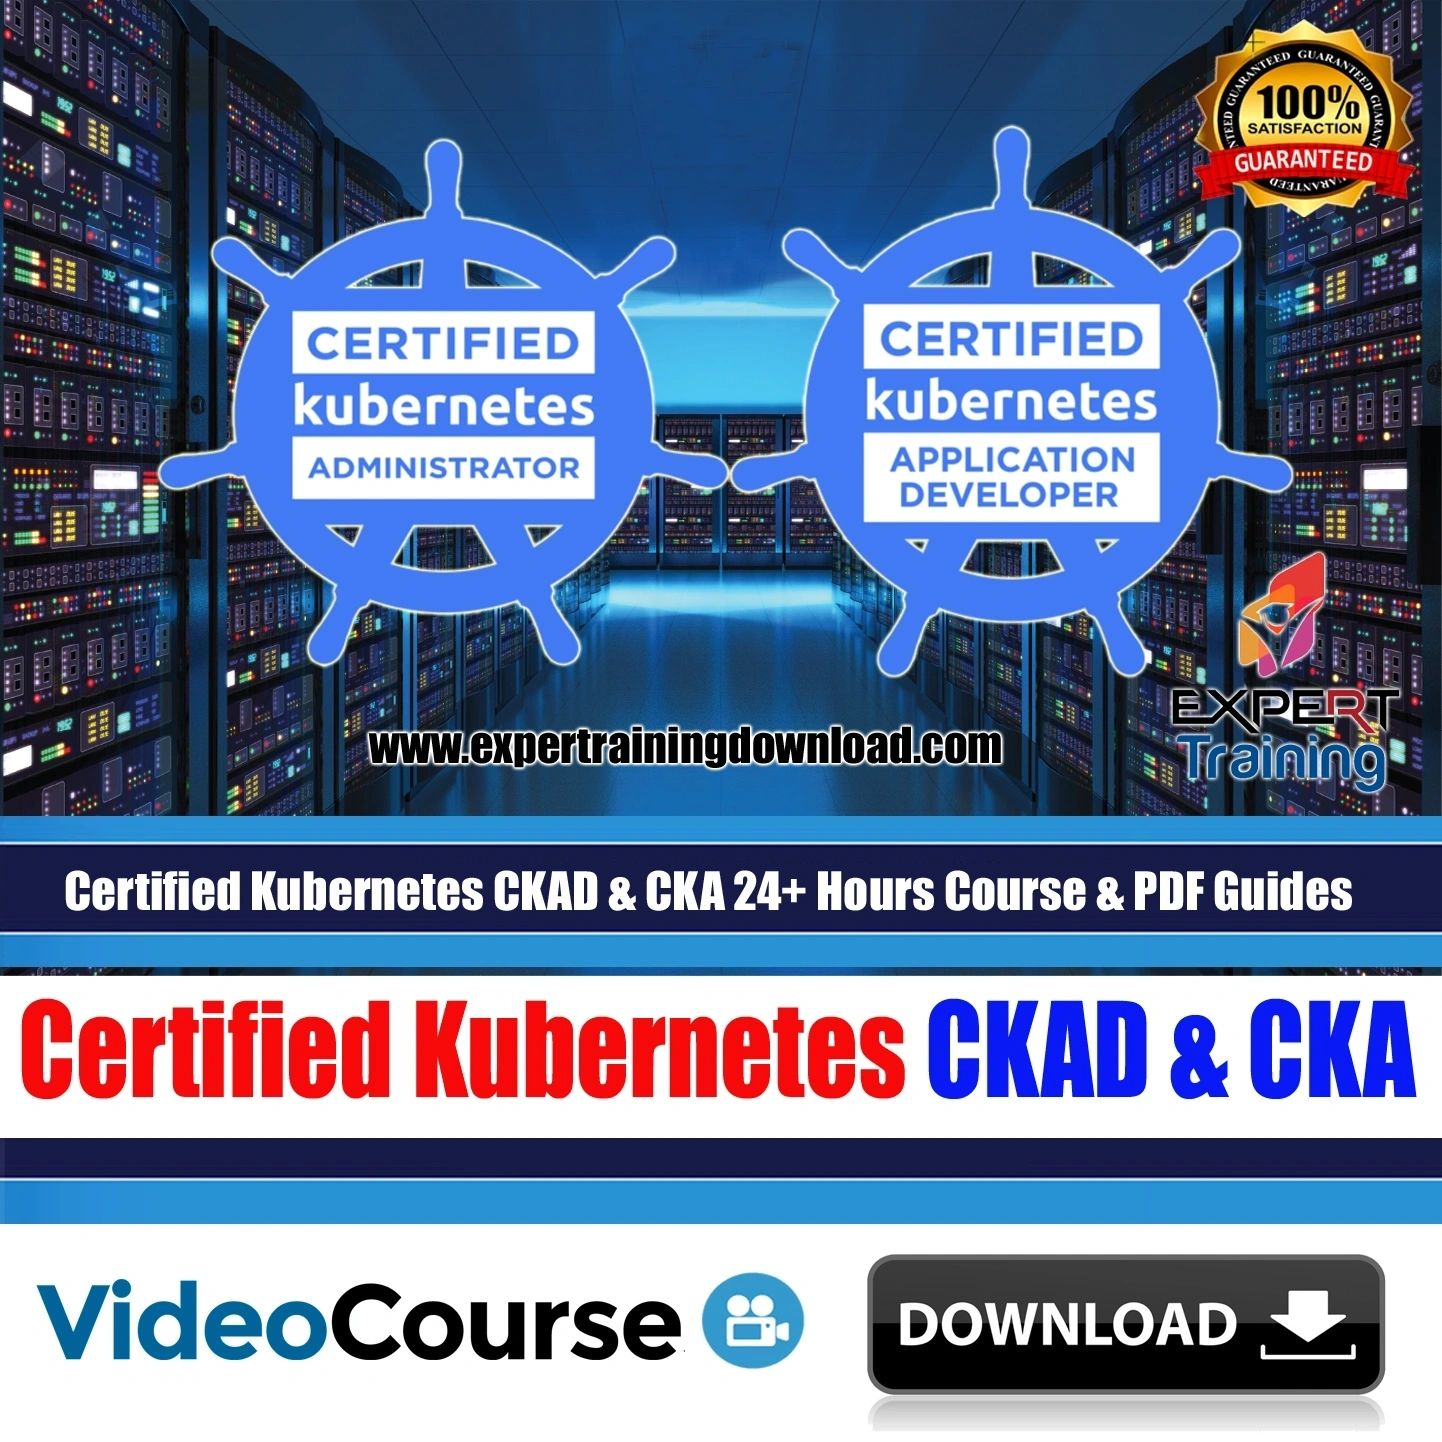 Certified Kubernetes CKAD & CKA (24+ Hours) Course & PDF Guides